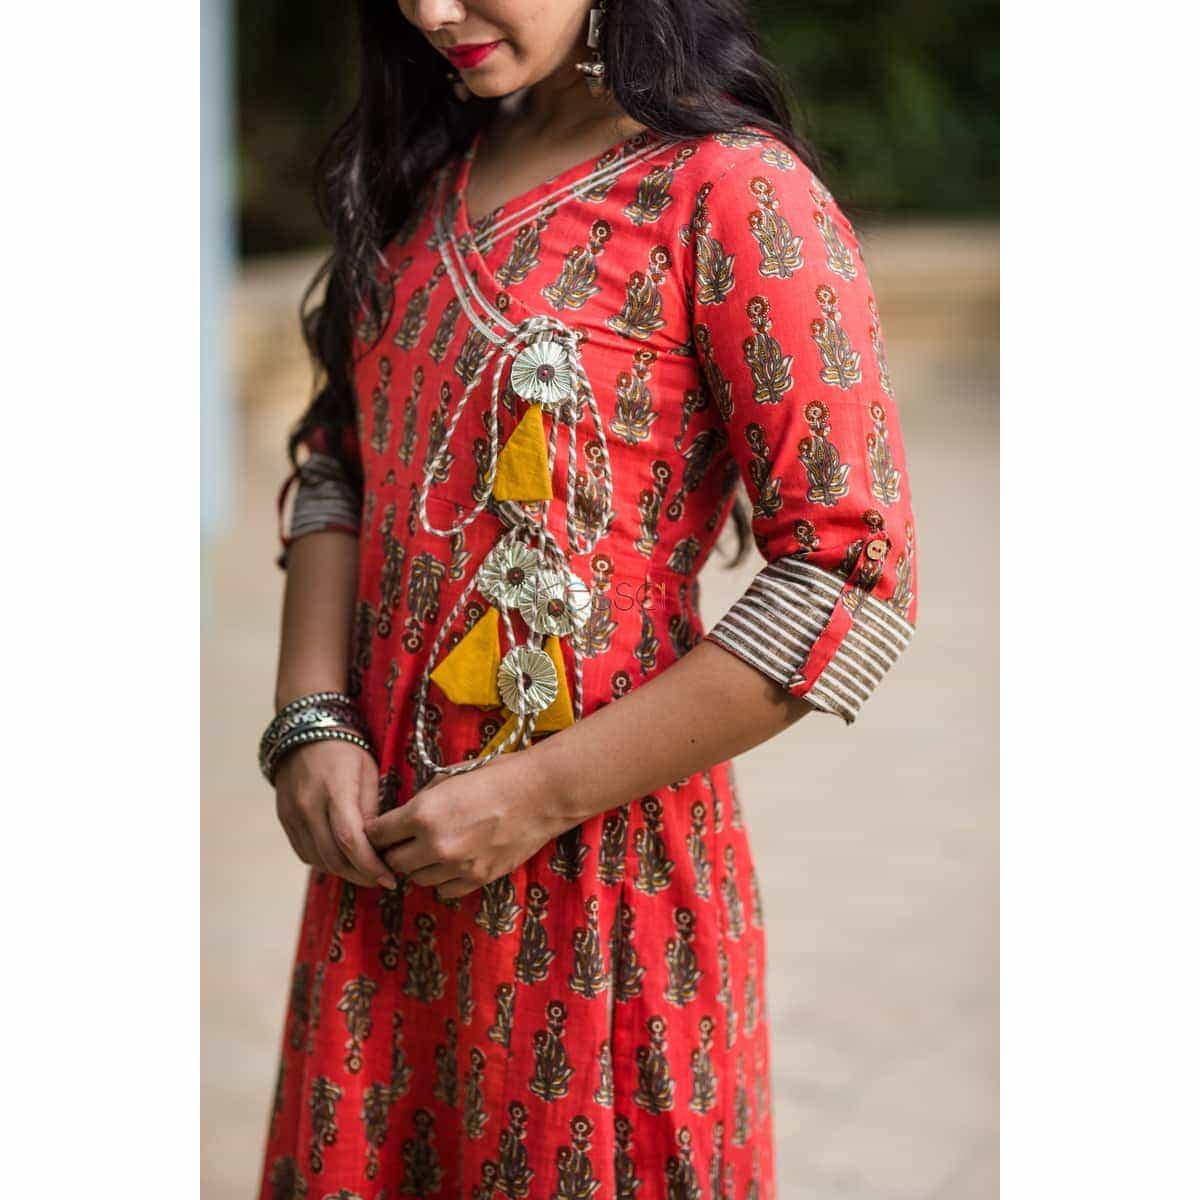 CHCH 25 COTTON BLENDED LATEST TRENDY FASHIONABLE STYLISH FANCY SUPER COOL  CHARMING STRIPED PRINTED READY TO WEAR SLIT CUT KURTI WITH PLAZO  MANUFACTURER IN INDIA NEWZEALAND USA - Reewaz International | Wholesaler